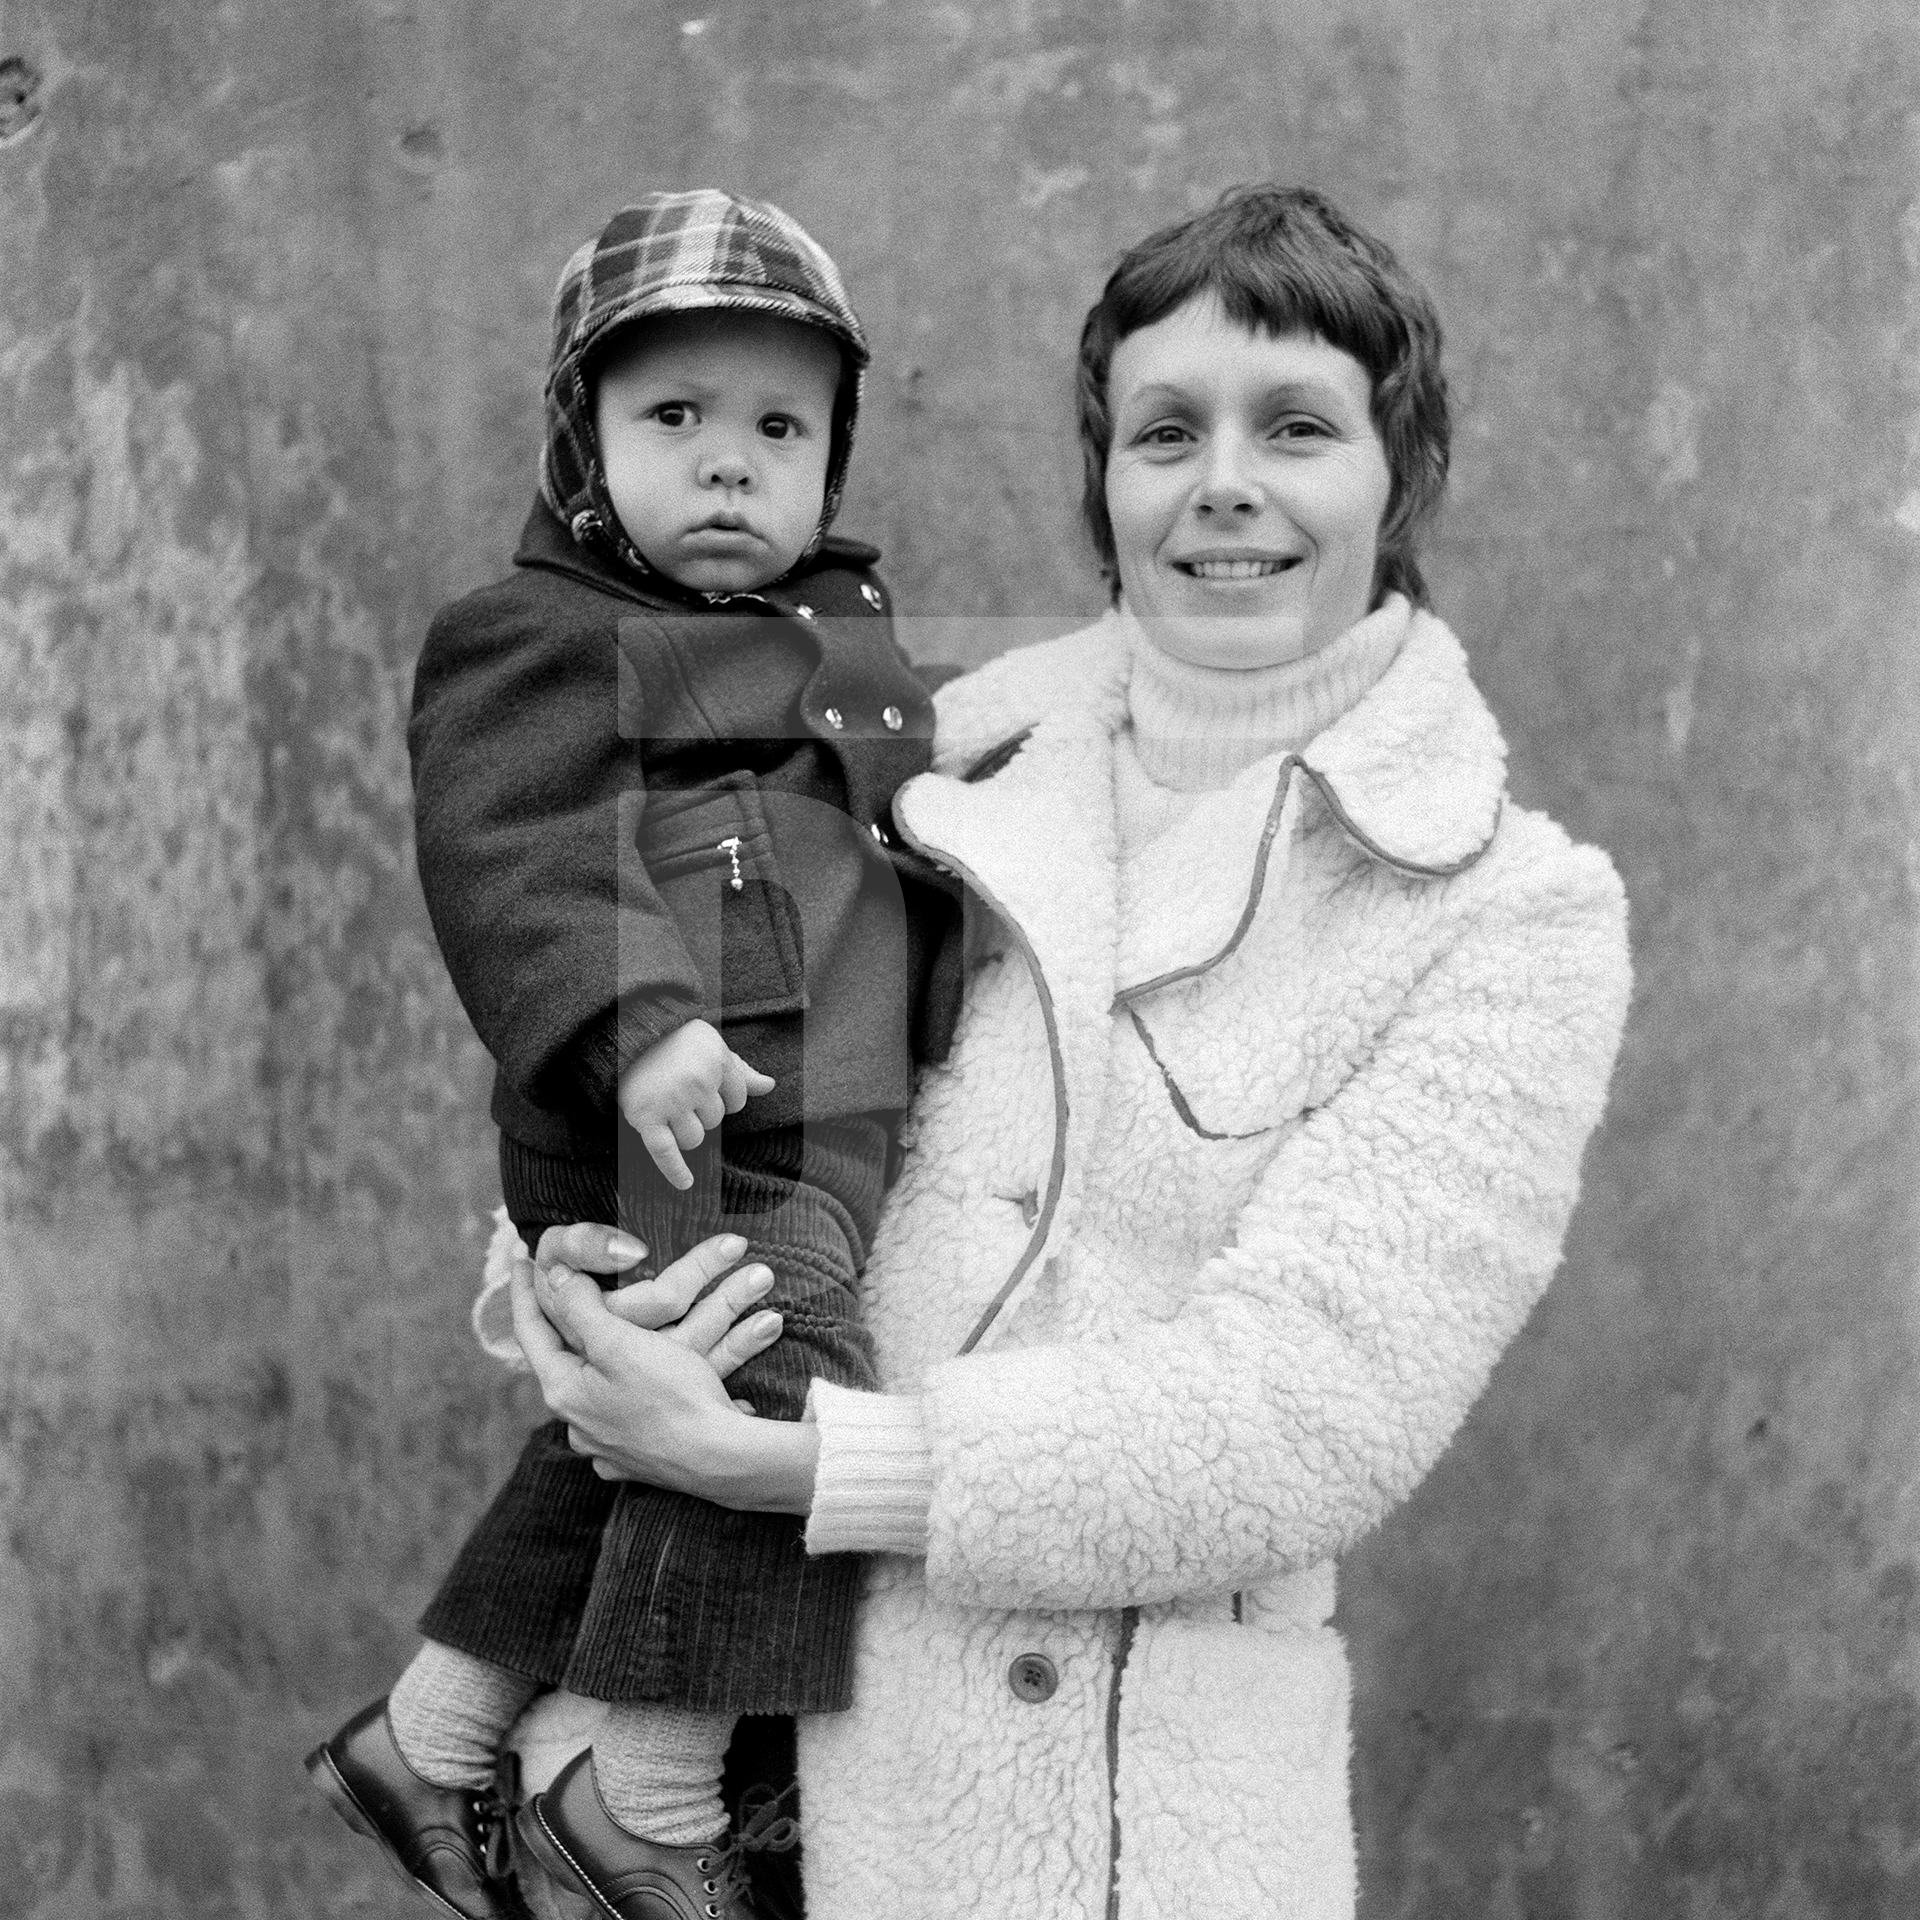 Mother and son, Maureen and David Wade, Barrow-in-Furness, Cumbria. November 1974 by Daniel Meadows